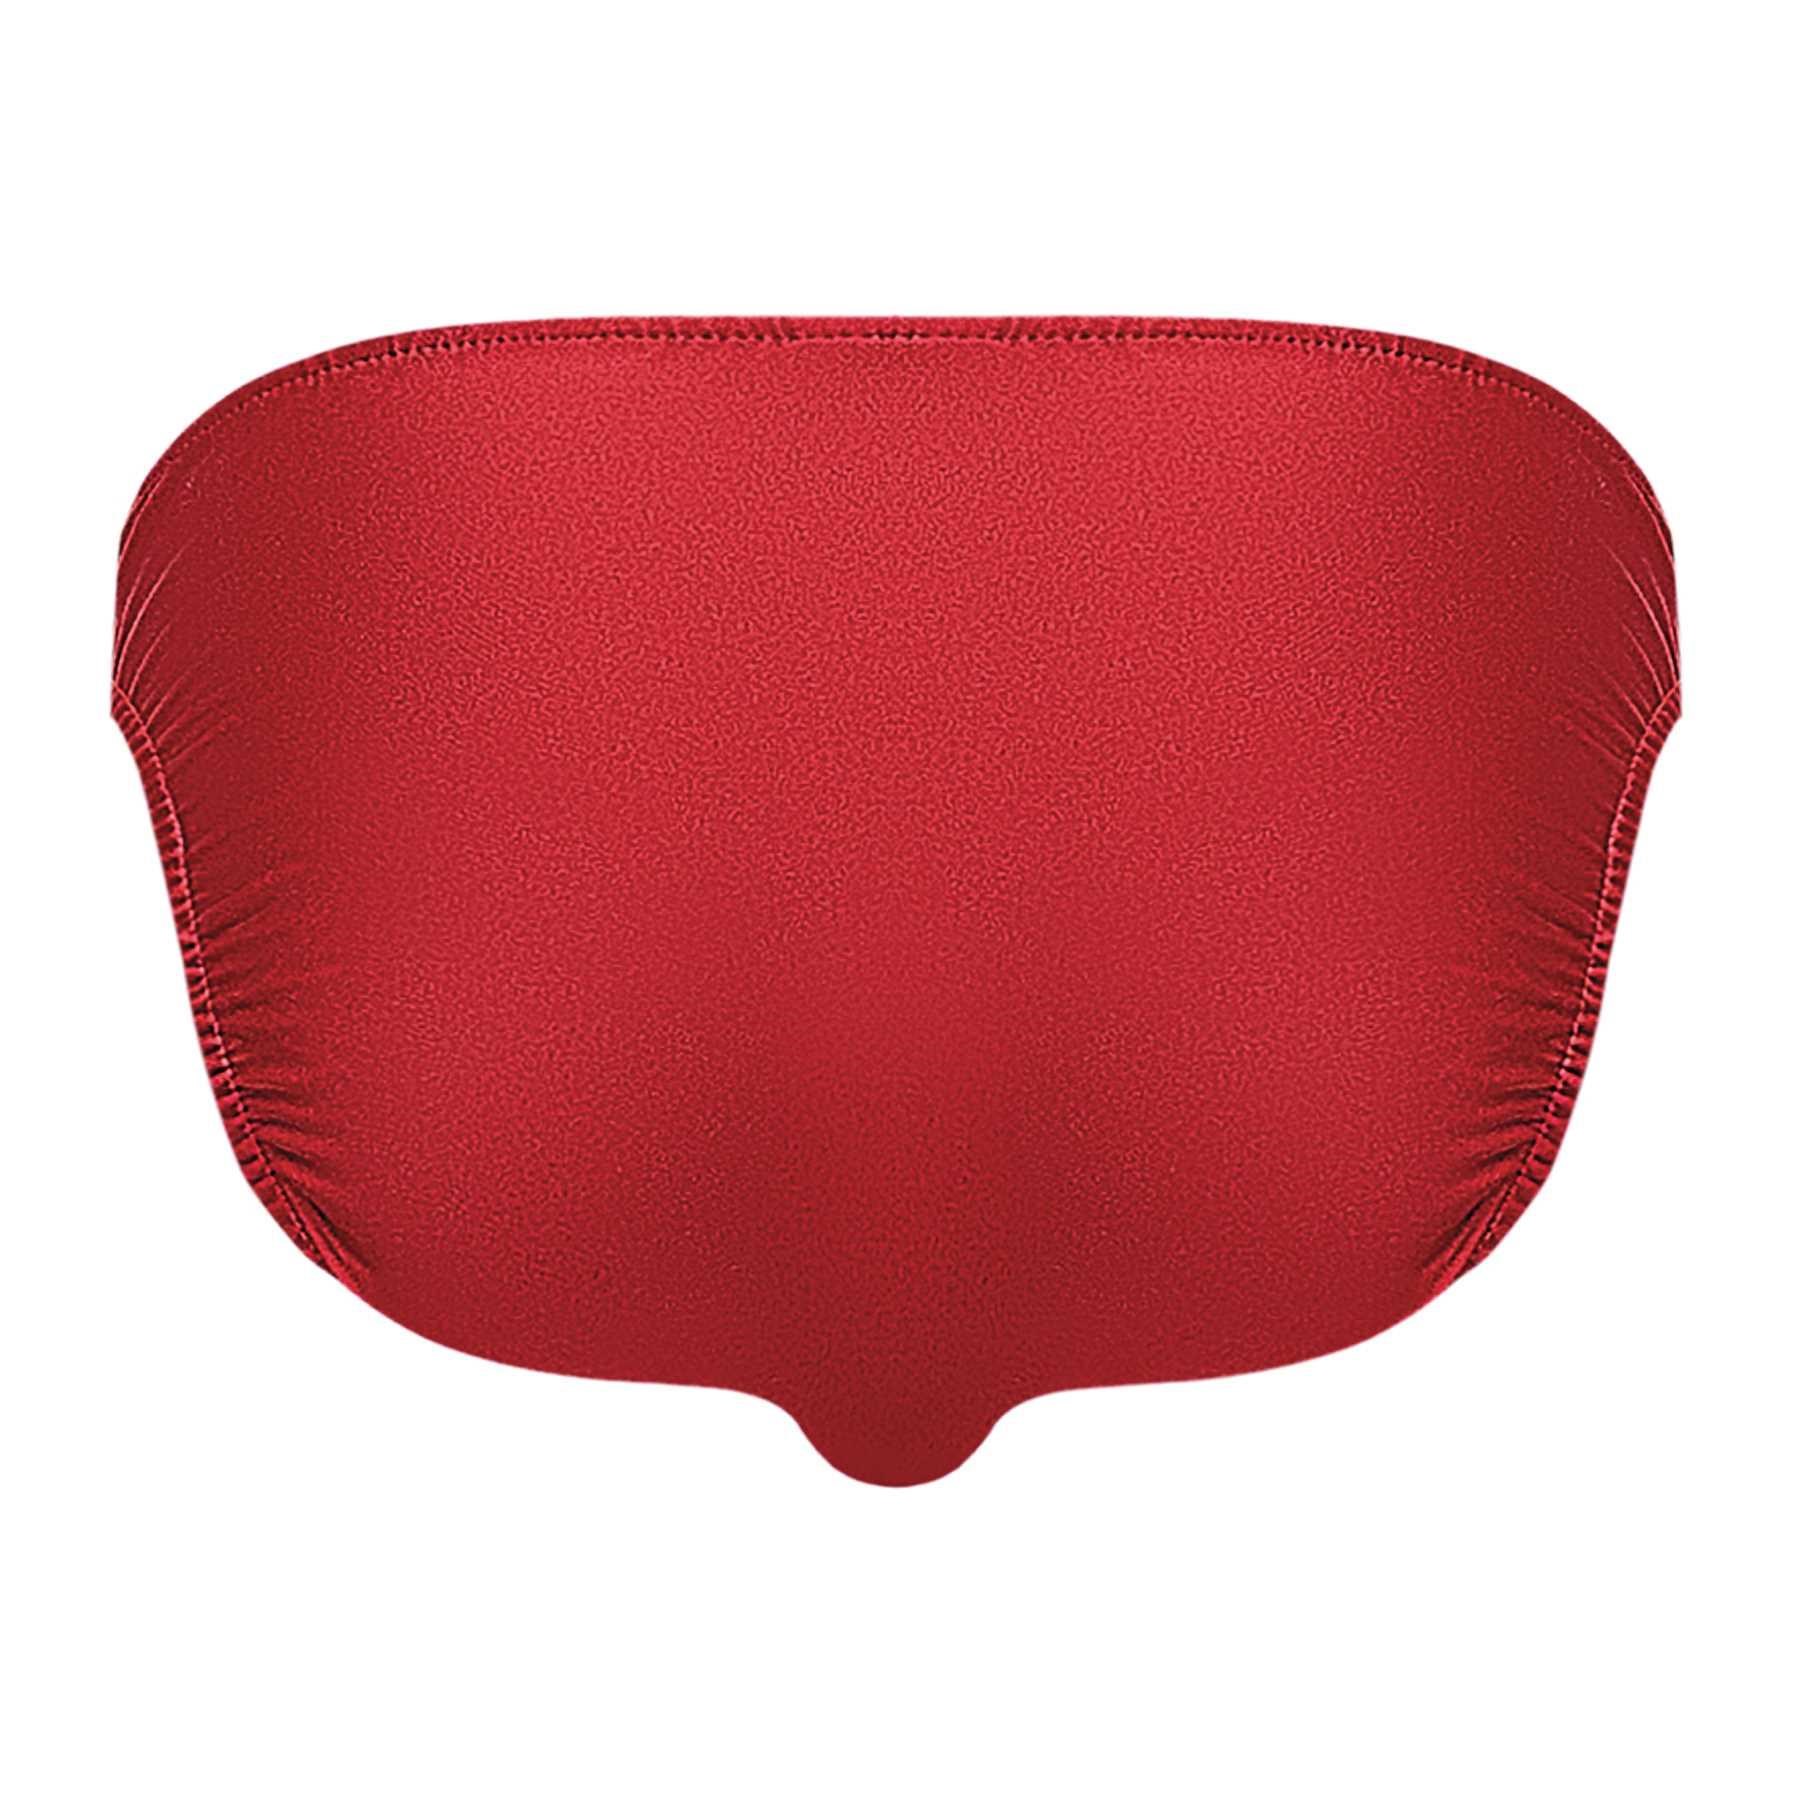 Pouchless brief red